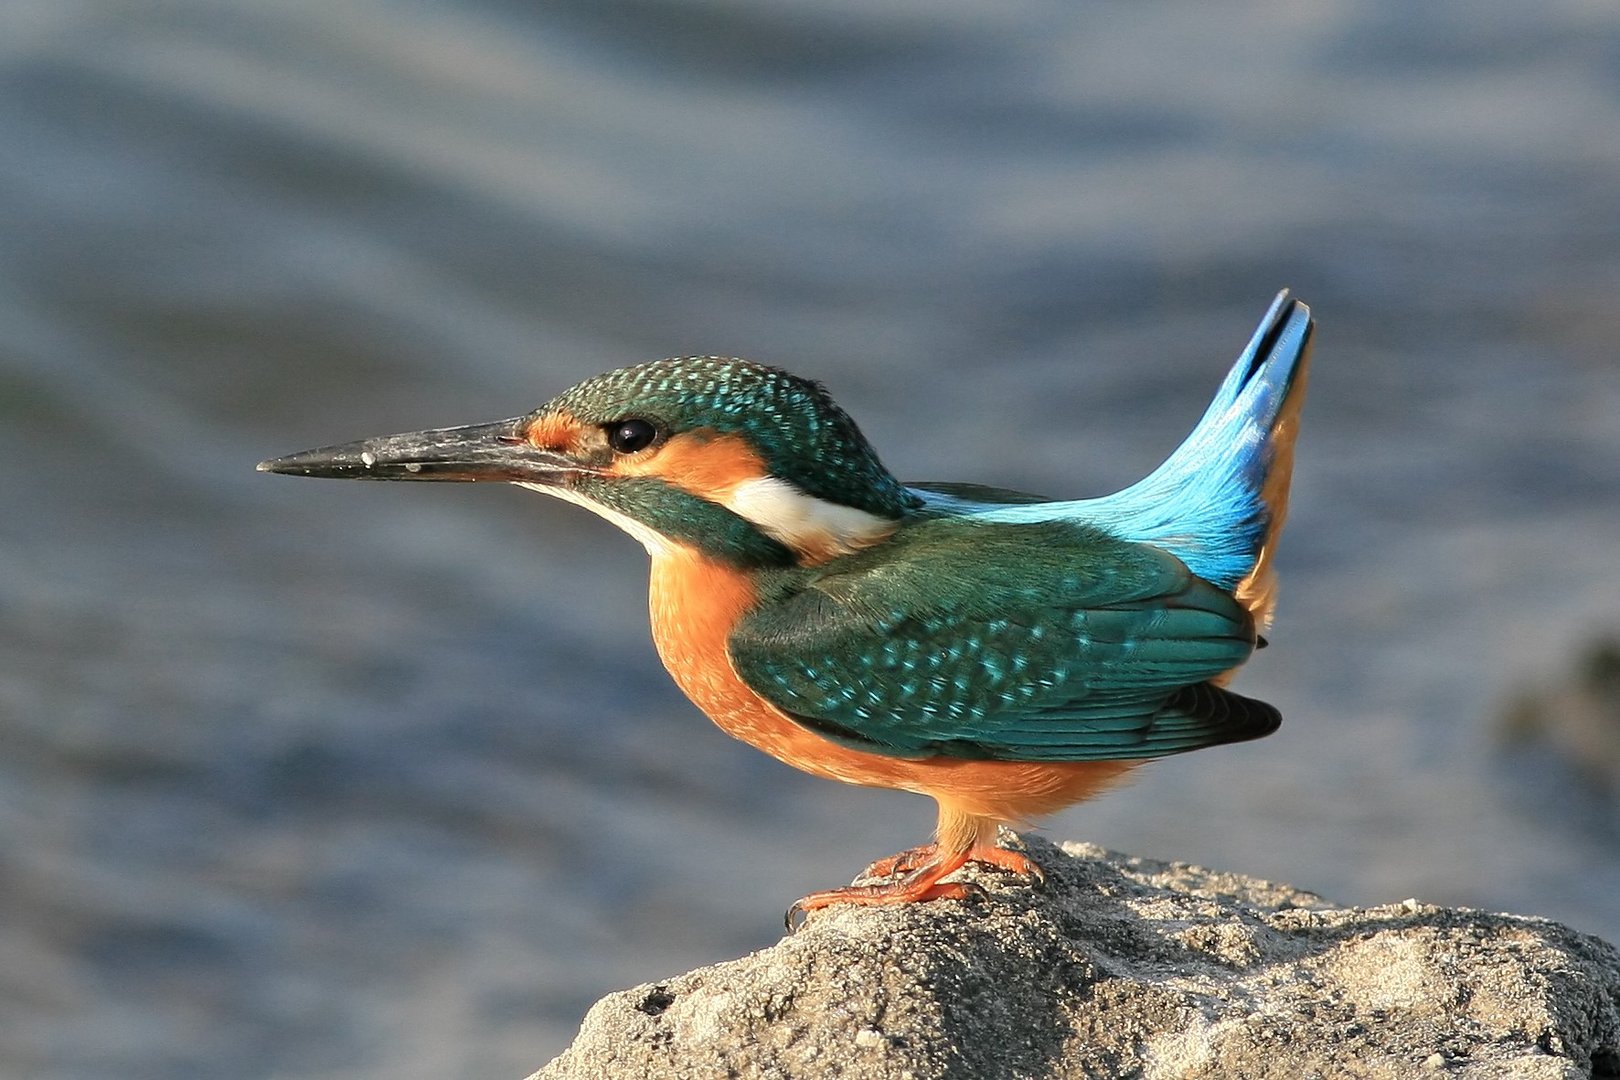 image Exhausted kingfisher treated and released back into the wild